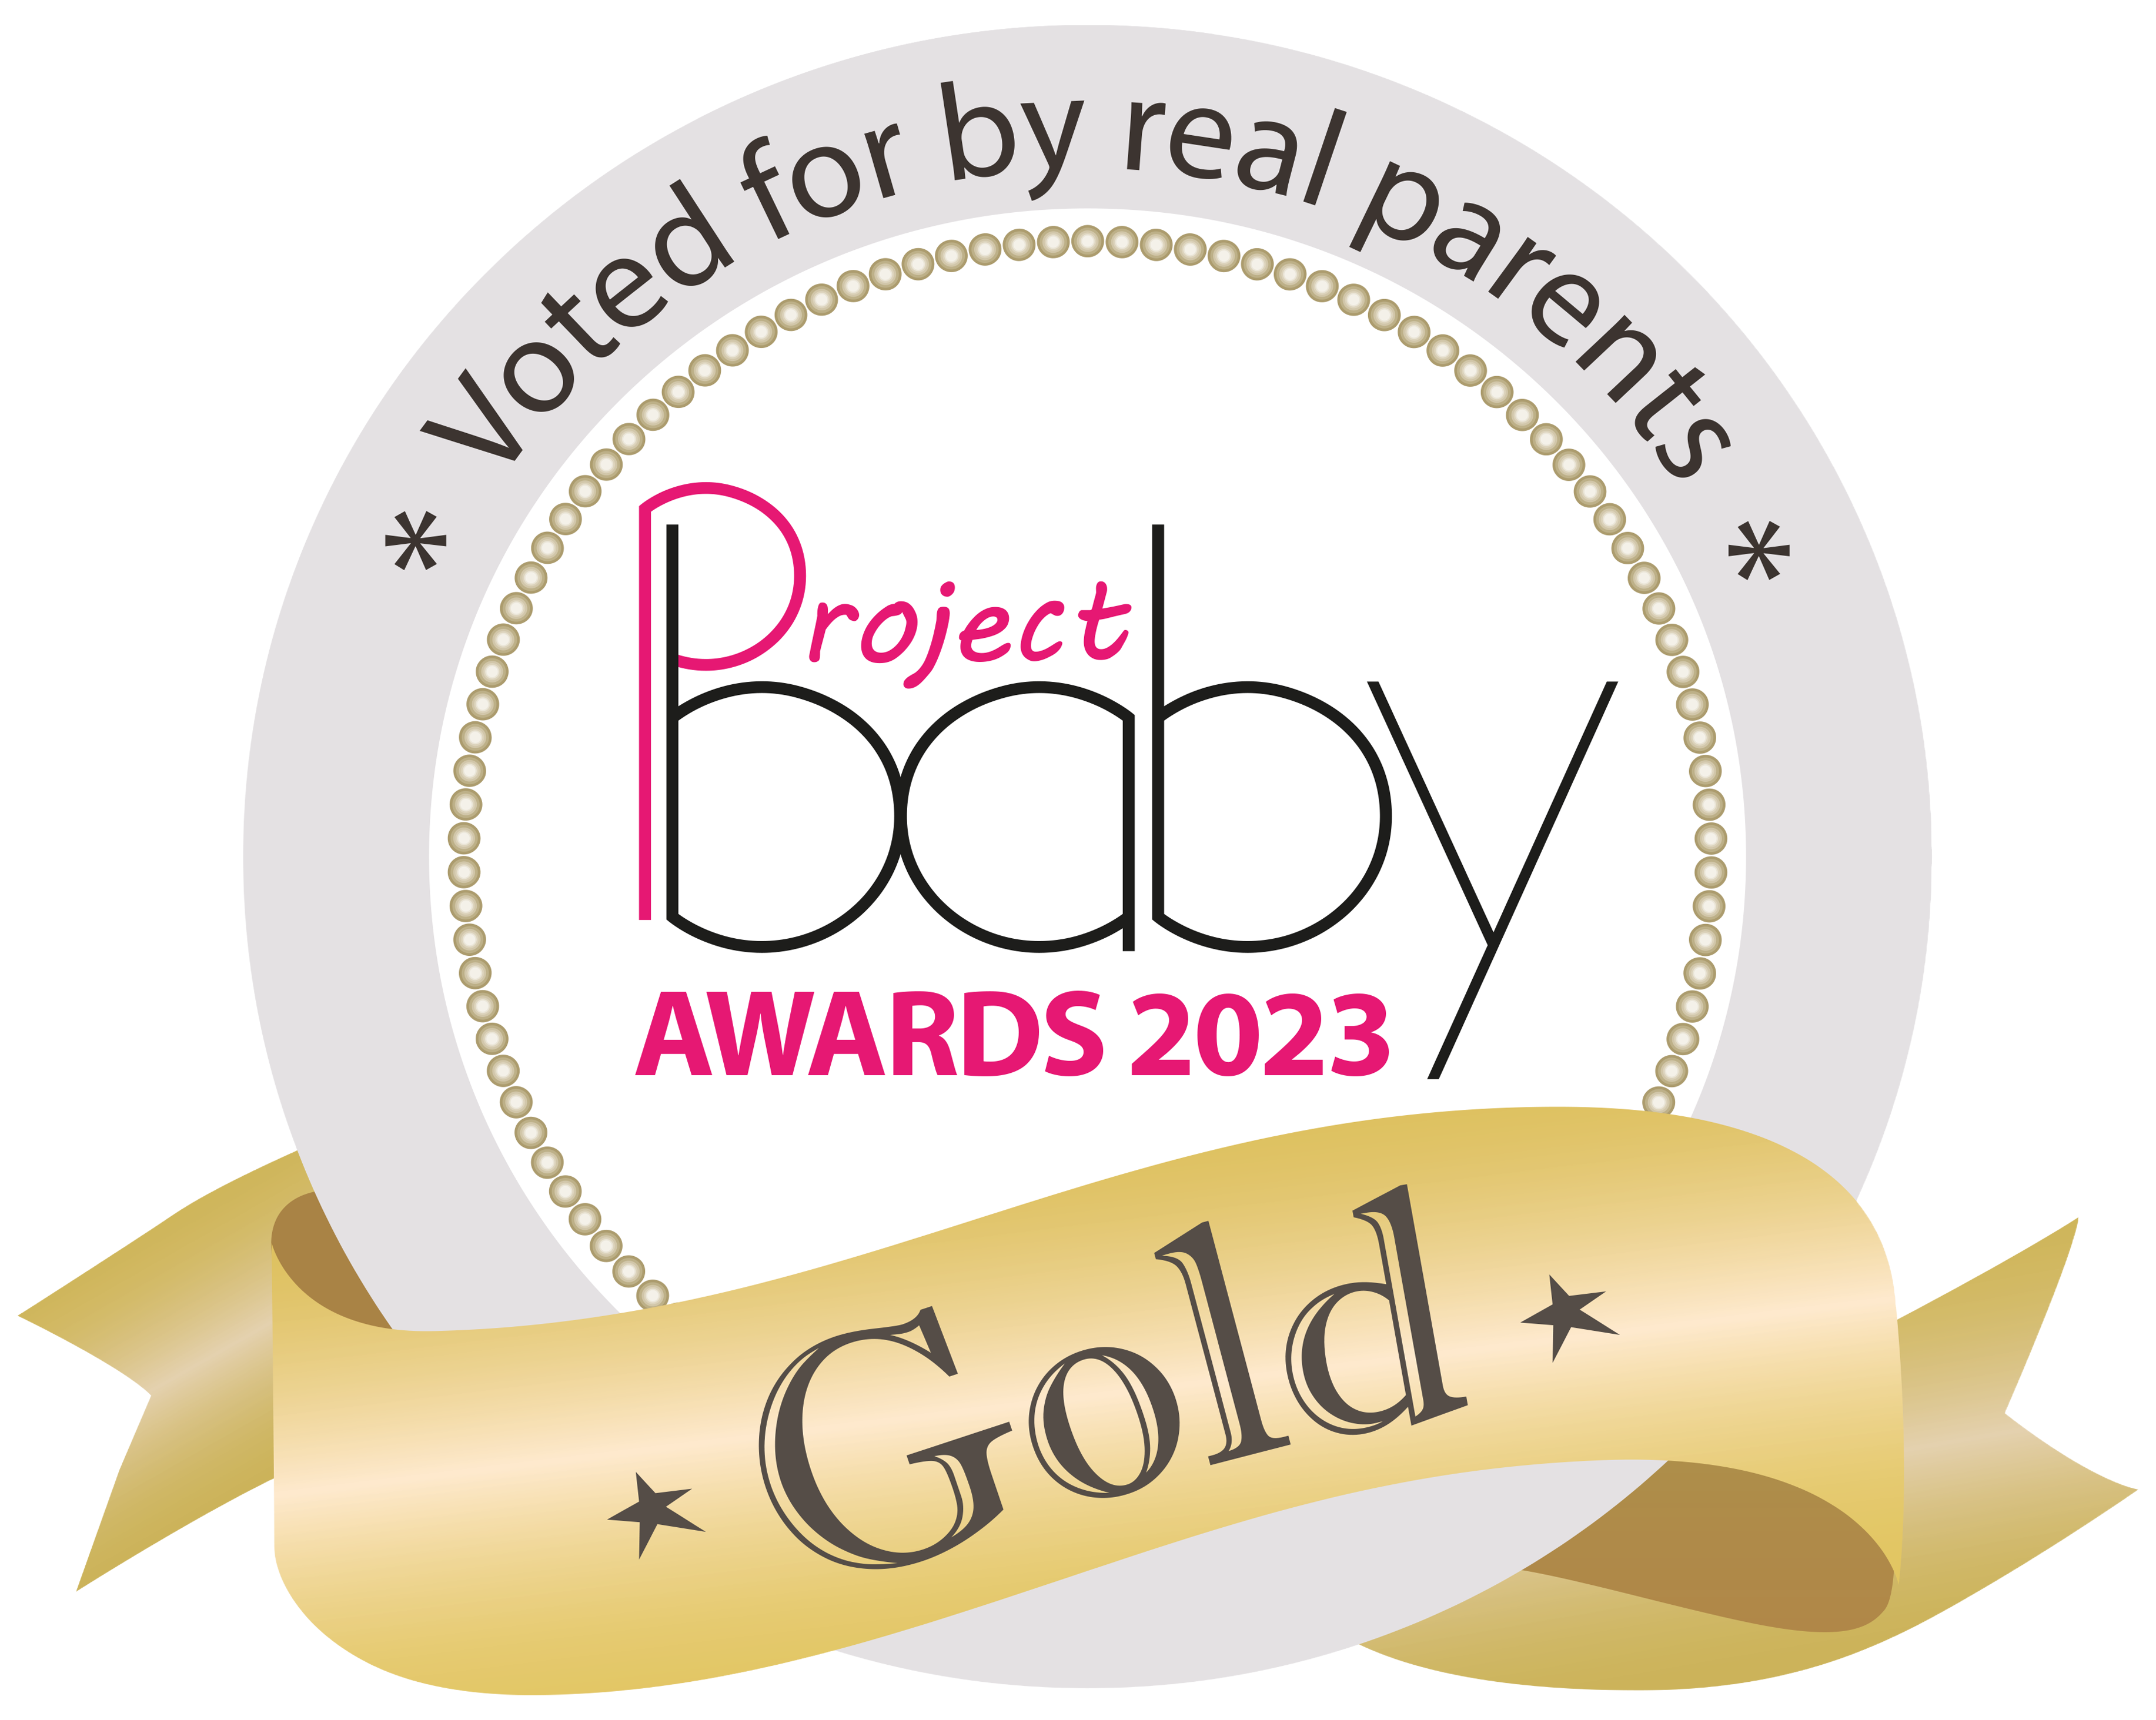 Project Baby Awards 2023 – Gold